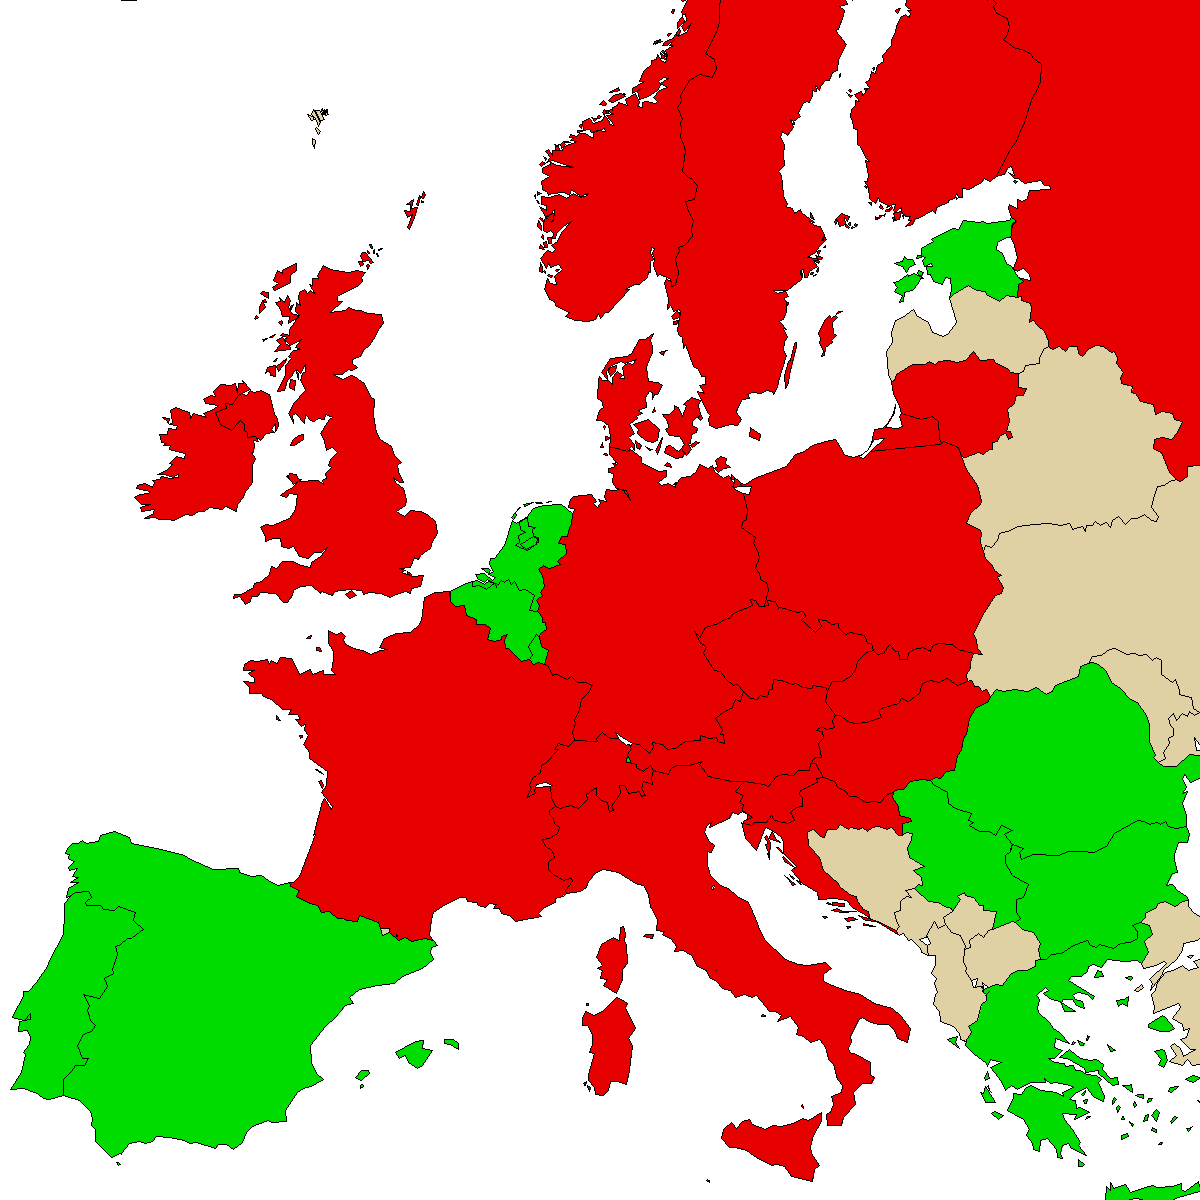 legal info map for our product 3CMC, green are countries with no ban, red with ban, grey is unknown